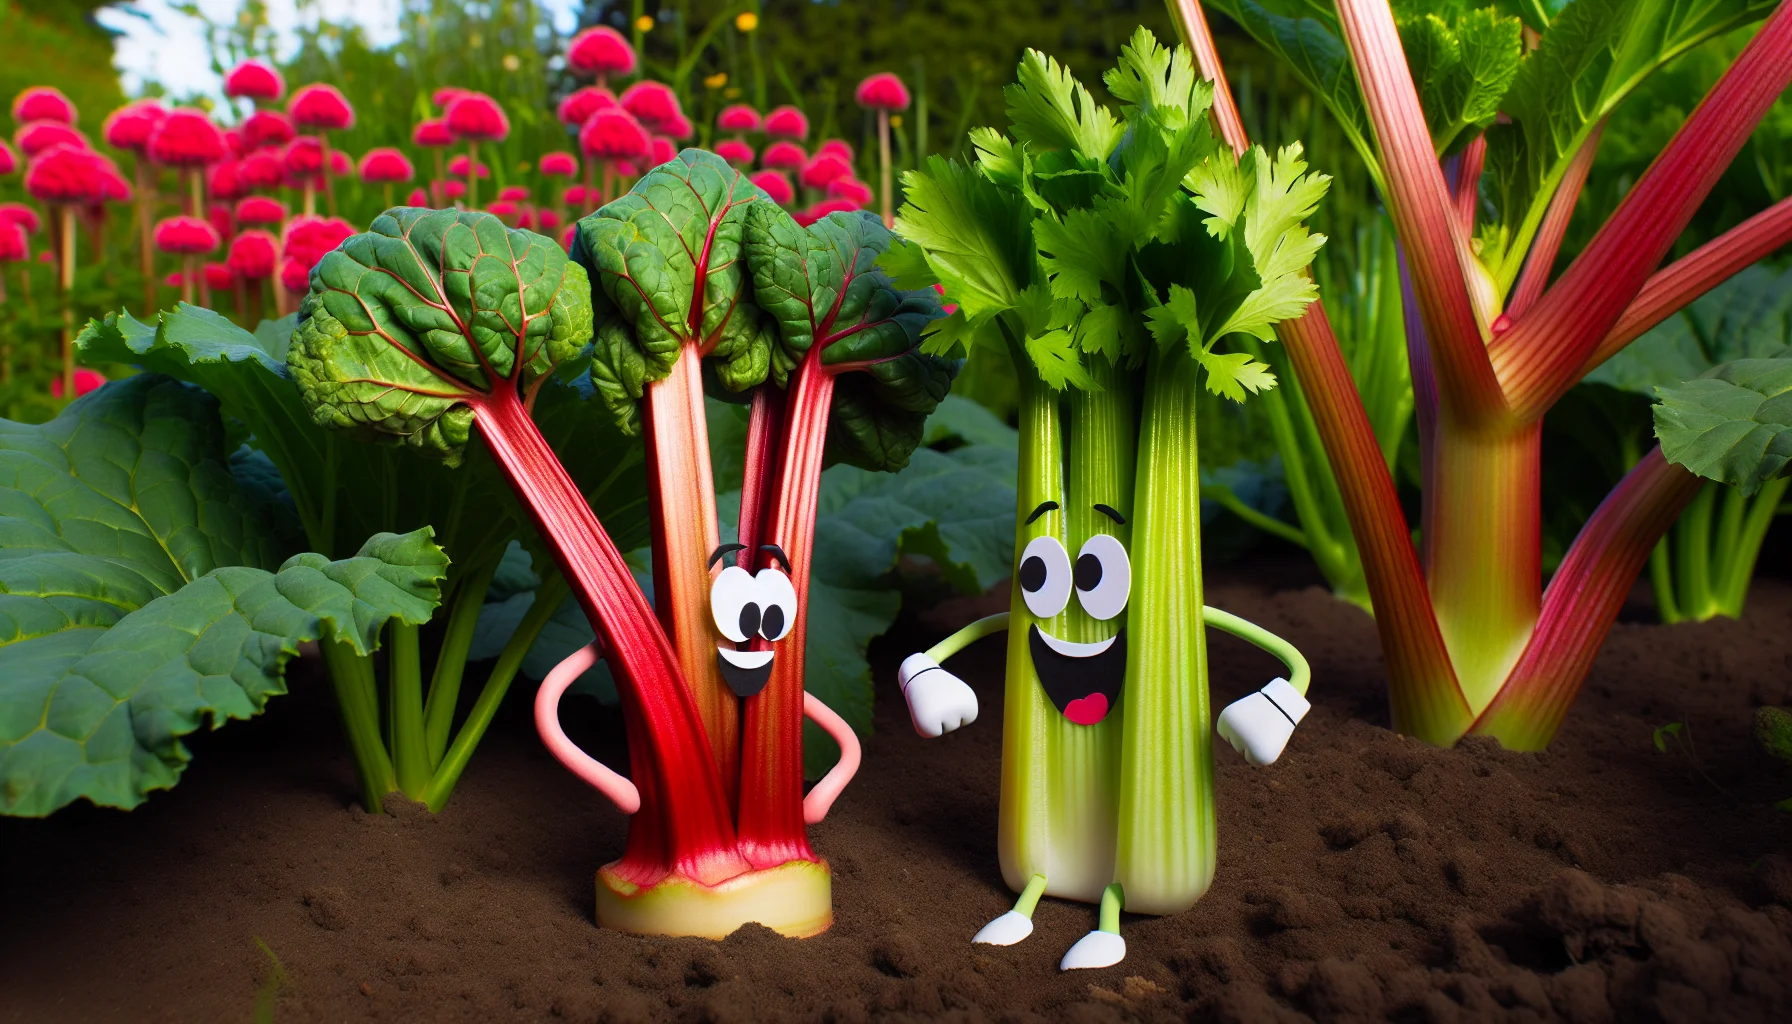 Create a humorous scenario situated in a vibrant garden where a rhubarb and a celery stalk, anthropomorphized with expressive faces and limbs, are depicted in a friendly mock debate over their family ties. The rhubarb, with its crimson stalks and huge leaves, emphasizes its own uniqueness, while the celery, tall and leafy green, refutes the family connection. This playful exchange is meant to inspire and bring joy to the gardening experience.